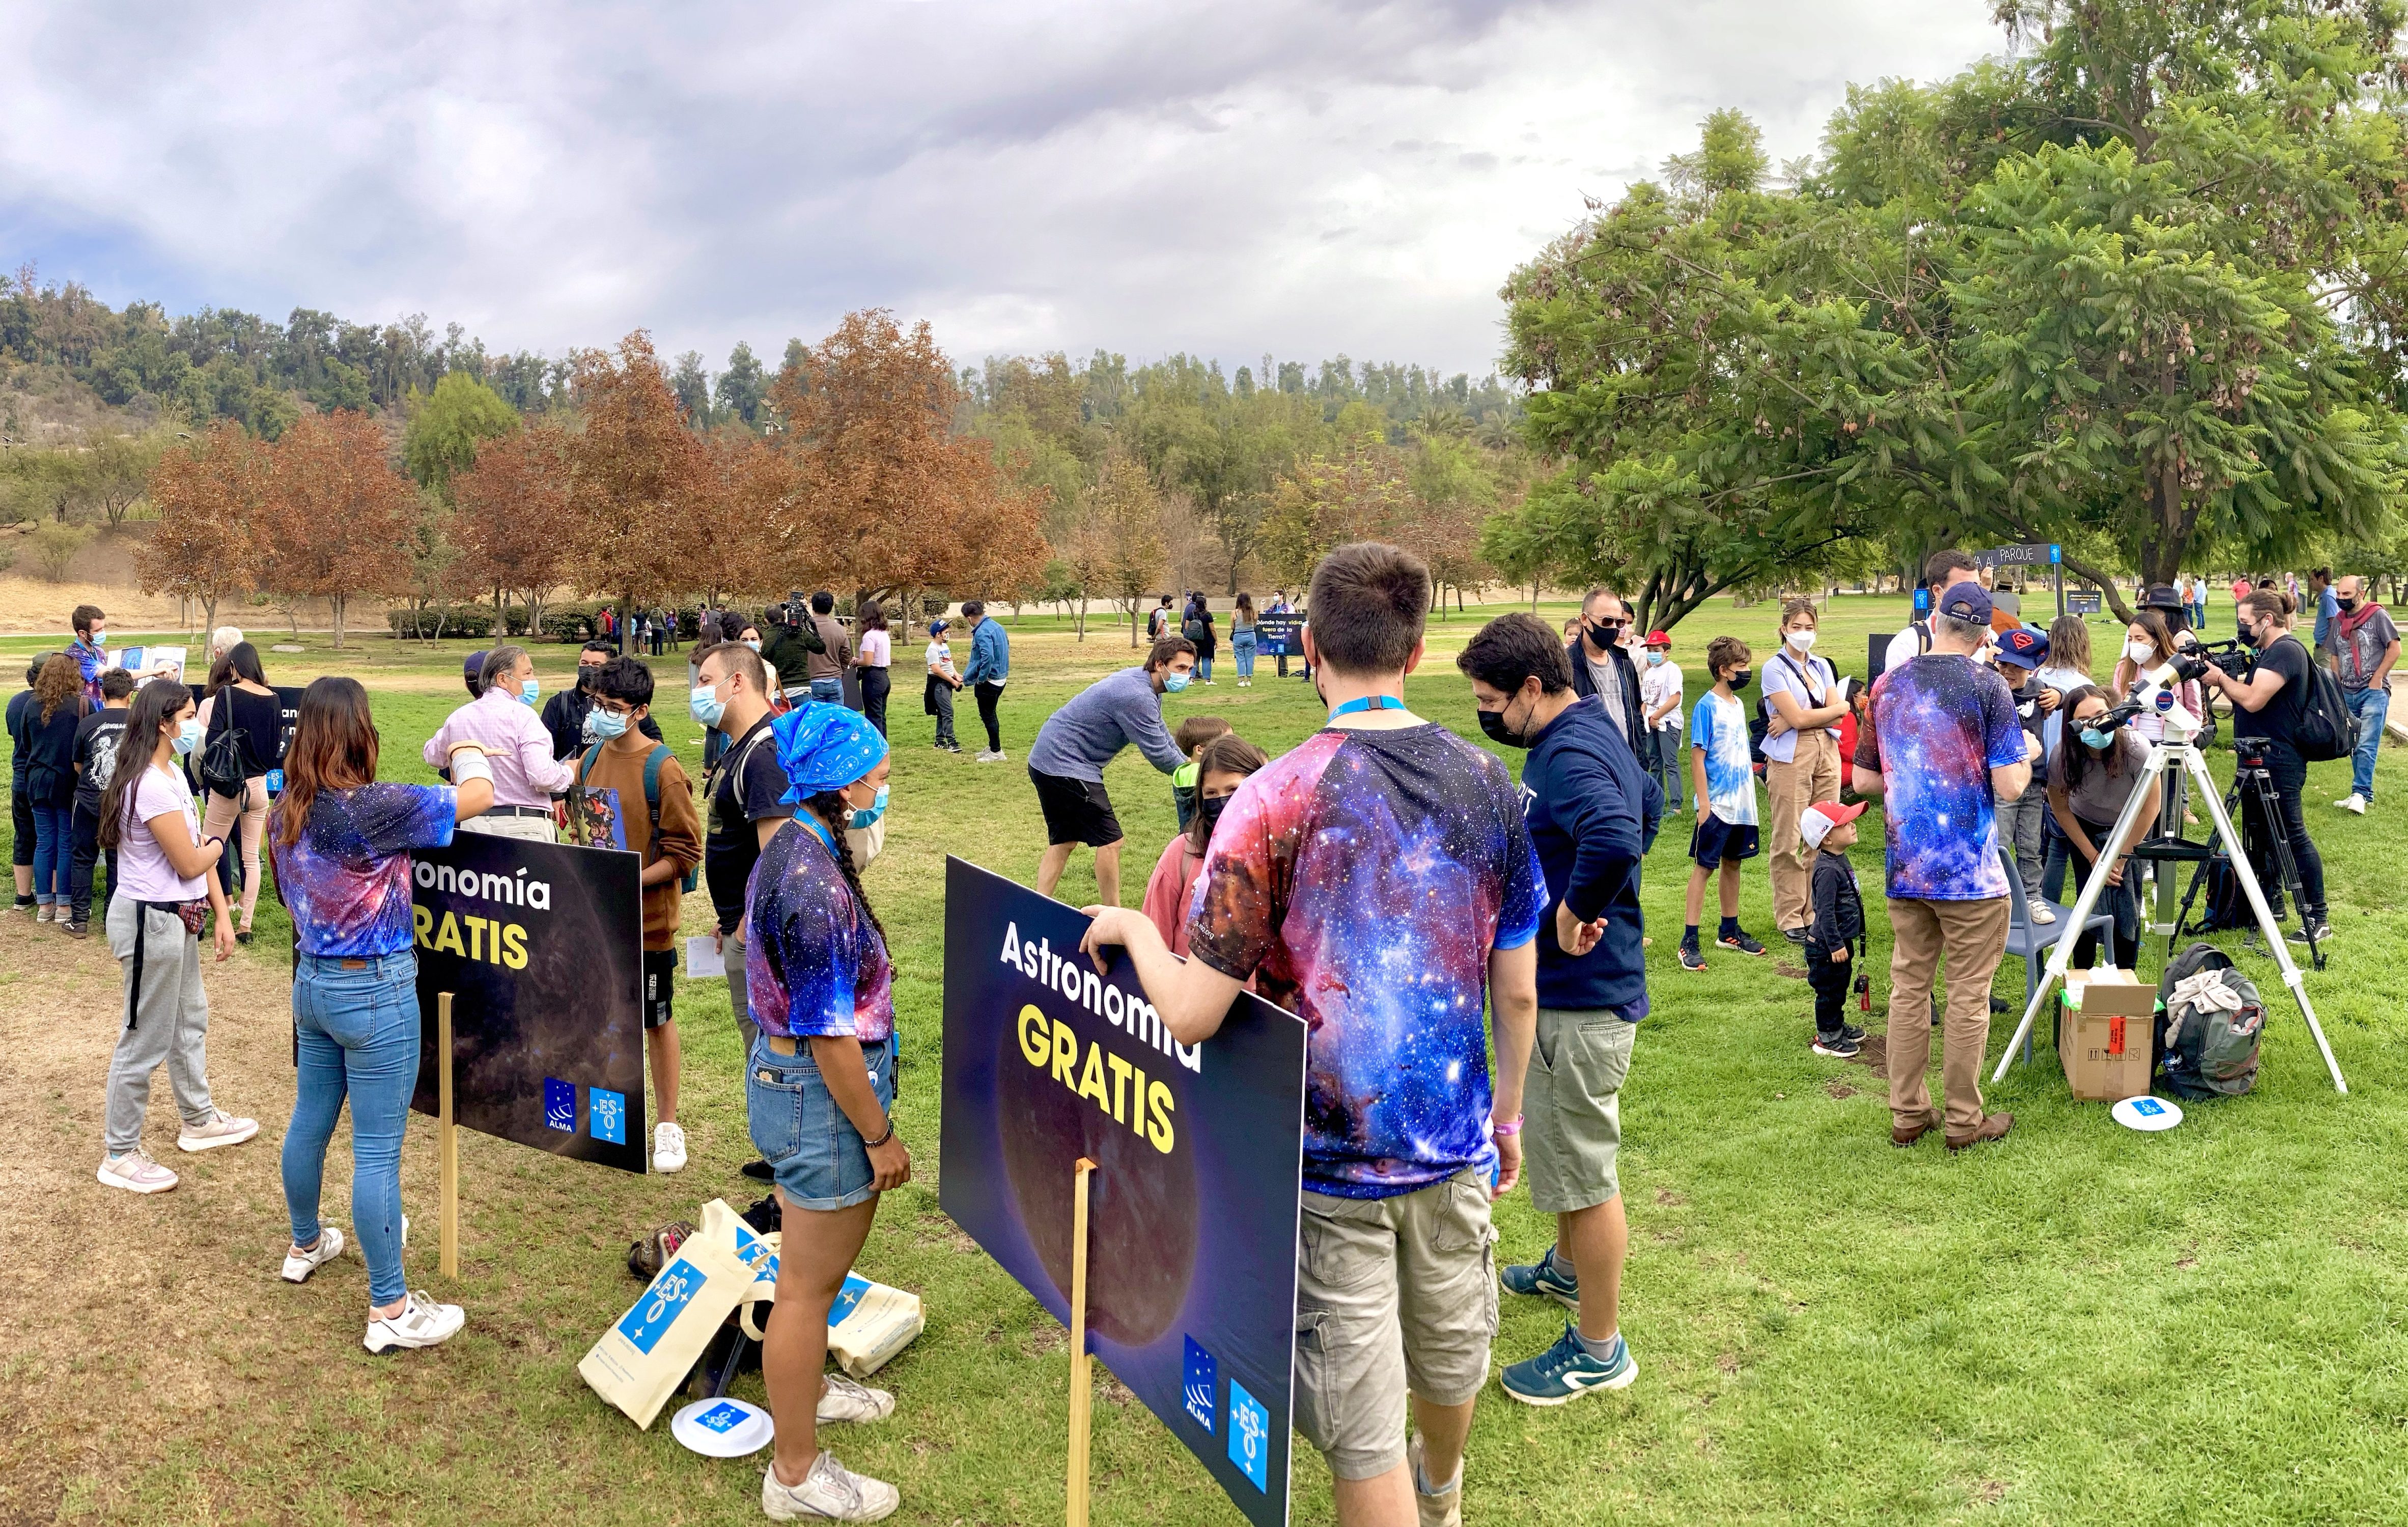 After more than two years without holding face-to-face events due to the pandemic, the ALMA observatory together with its partners ESO, NRAO and NAOJ decided to meet the public last Saturday, March 19, this time at the Bicentennial Park in Vitacura, to celebrate Astronomy Day in Chile.